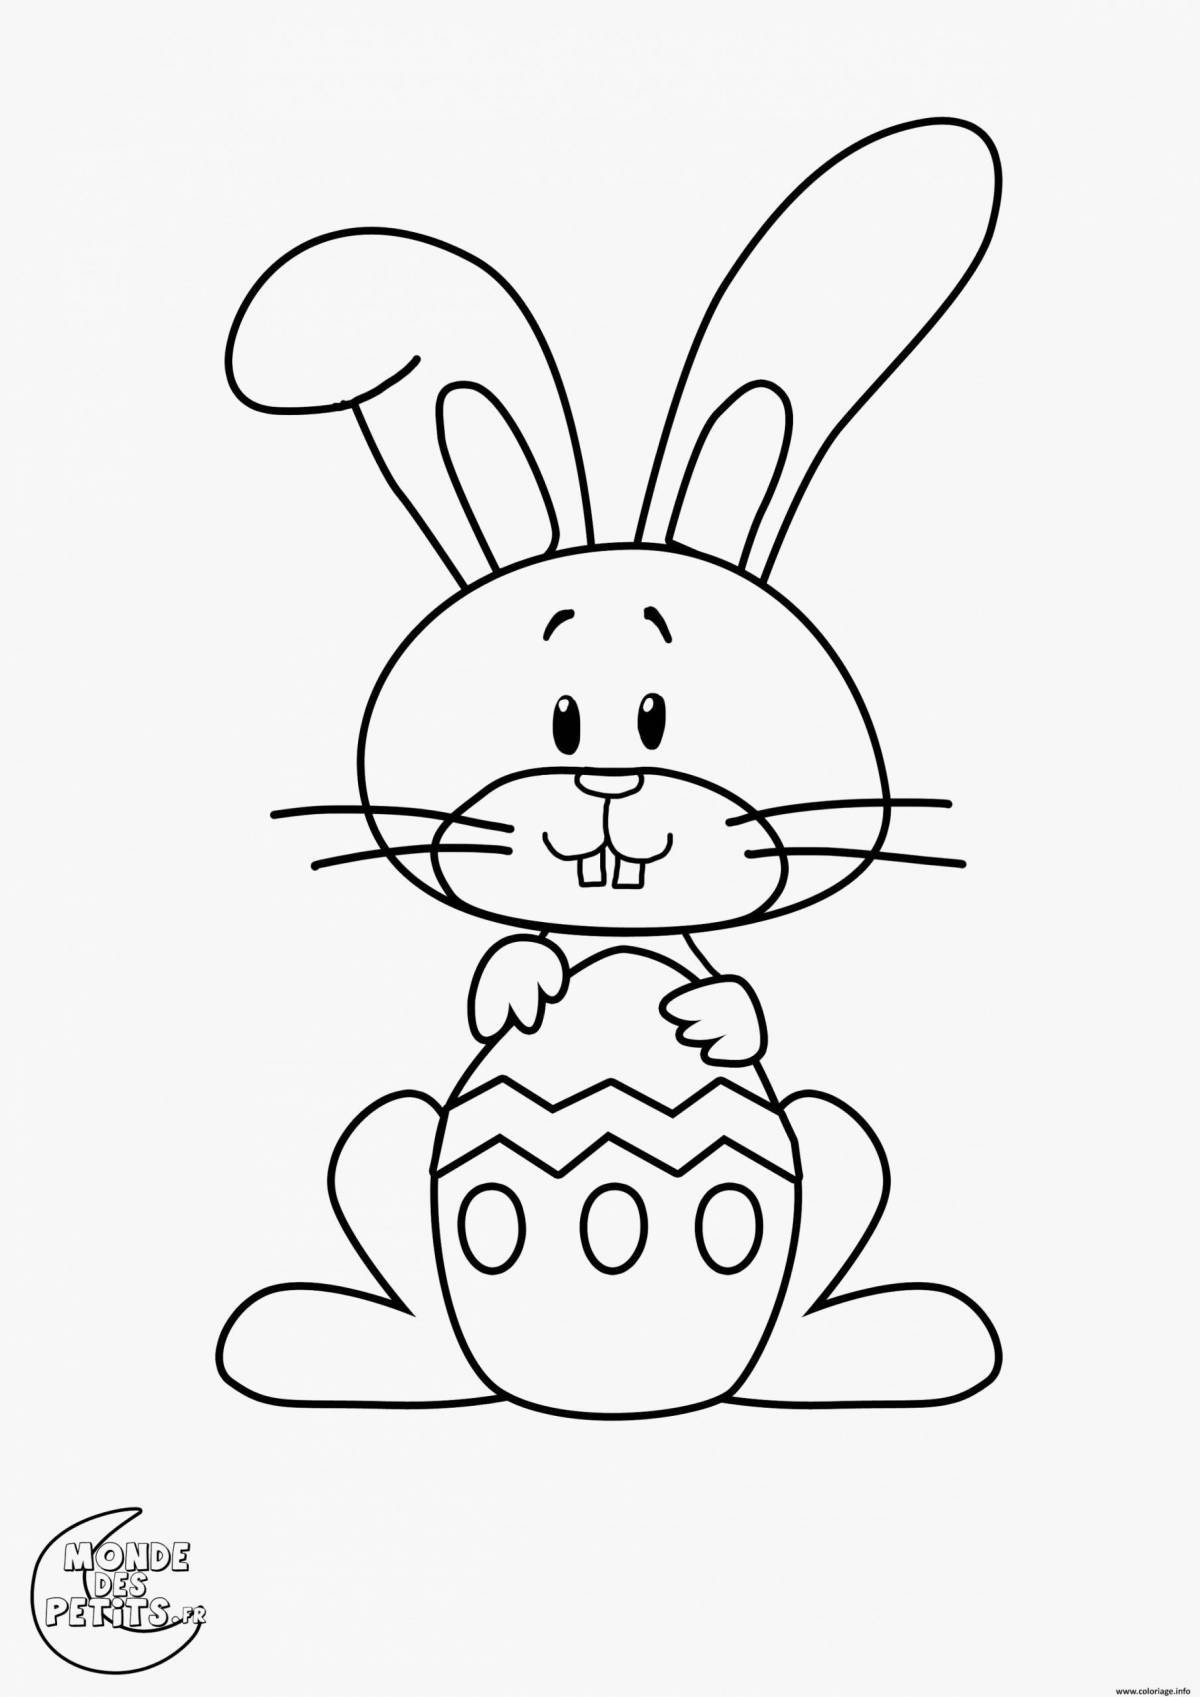 Exquisite rabbit coloring book for 3-4 year olds